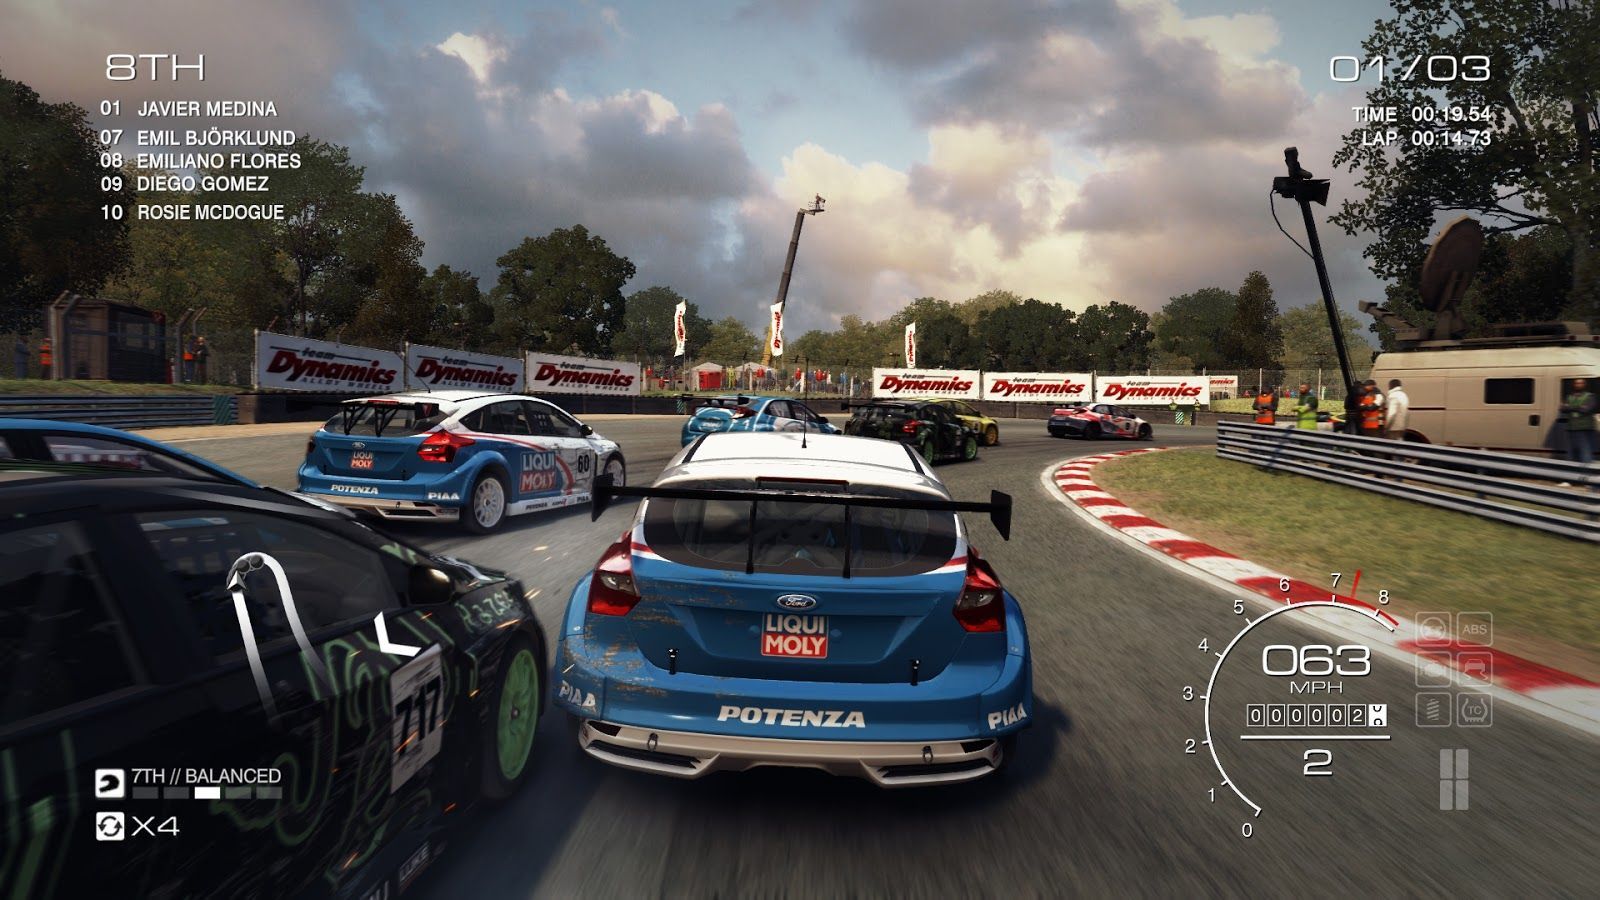 grid autosport android review